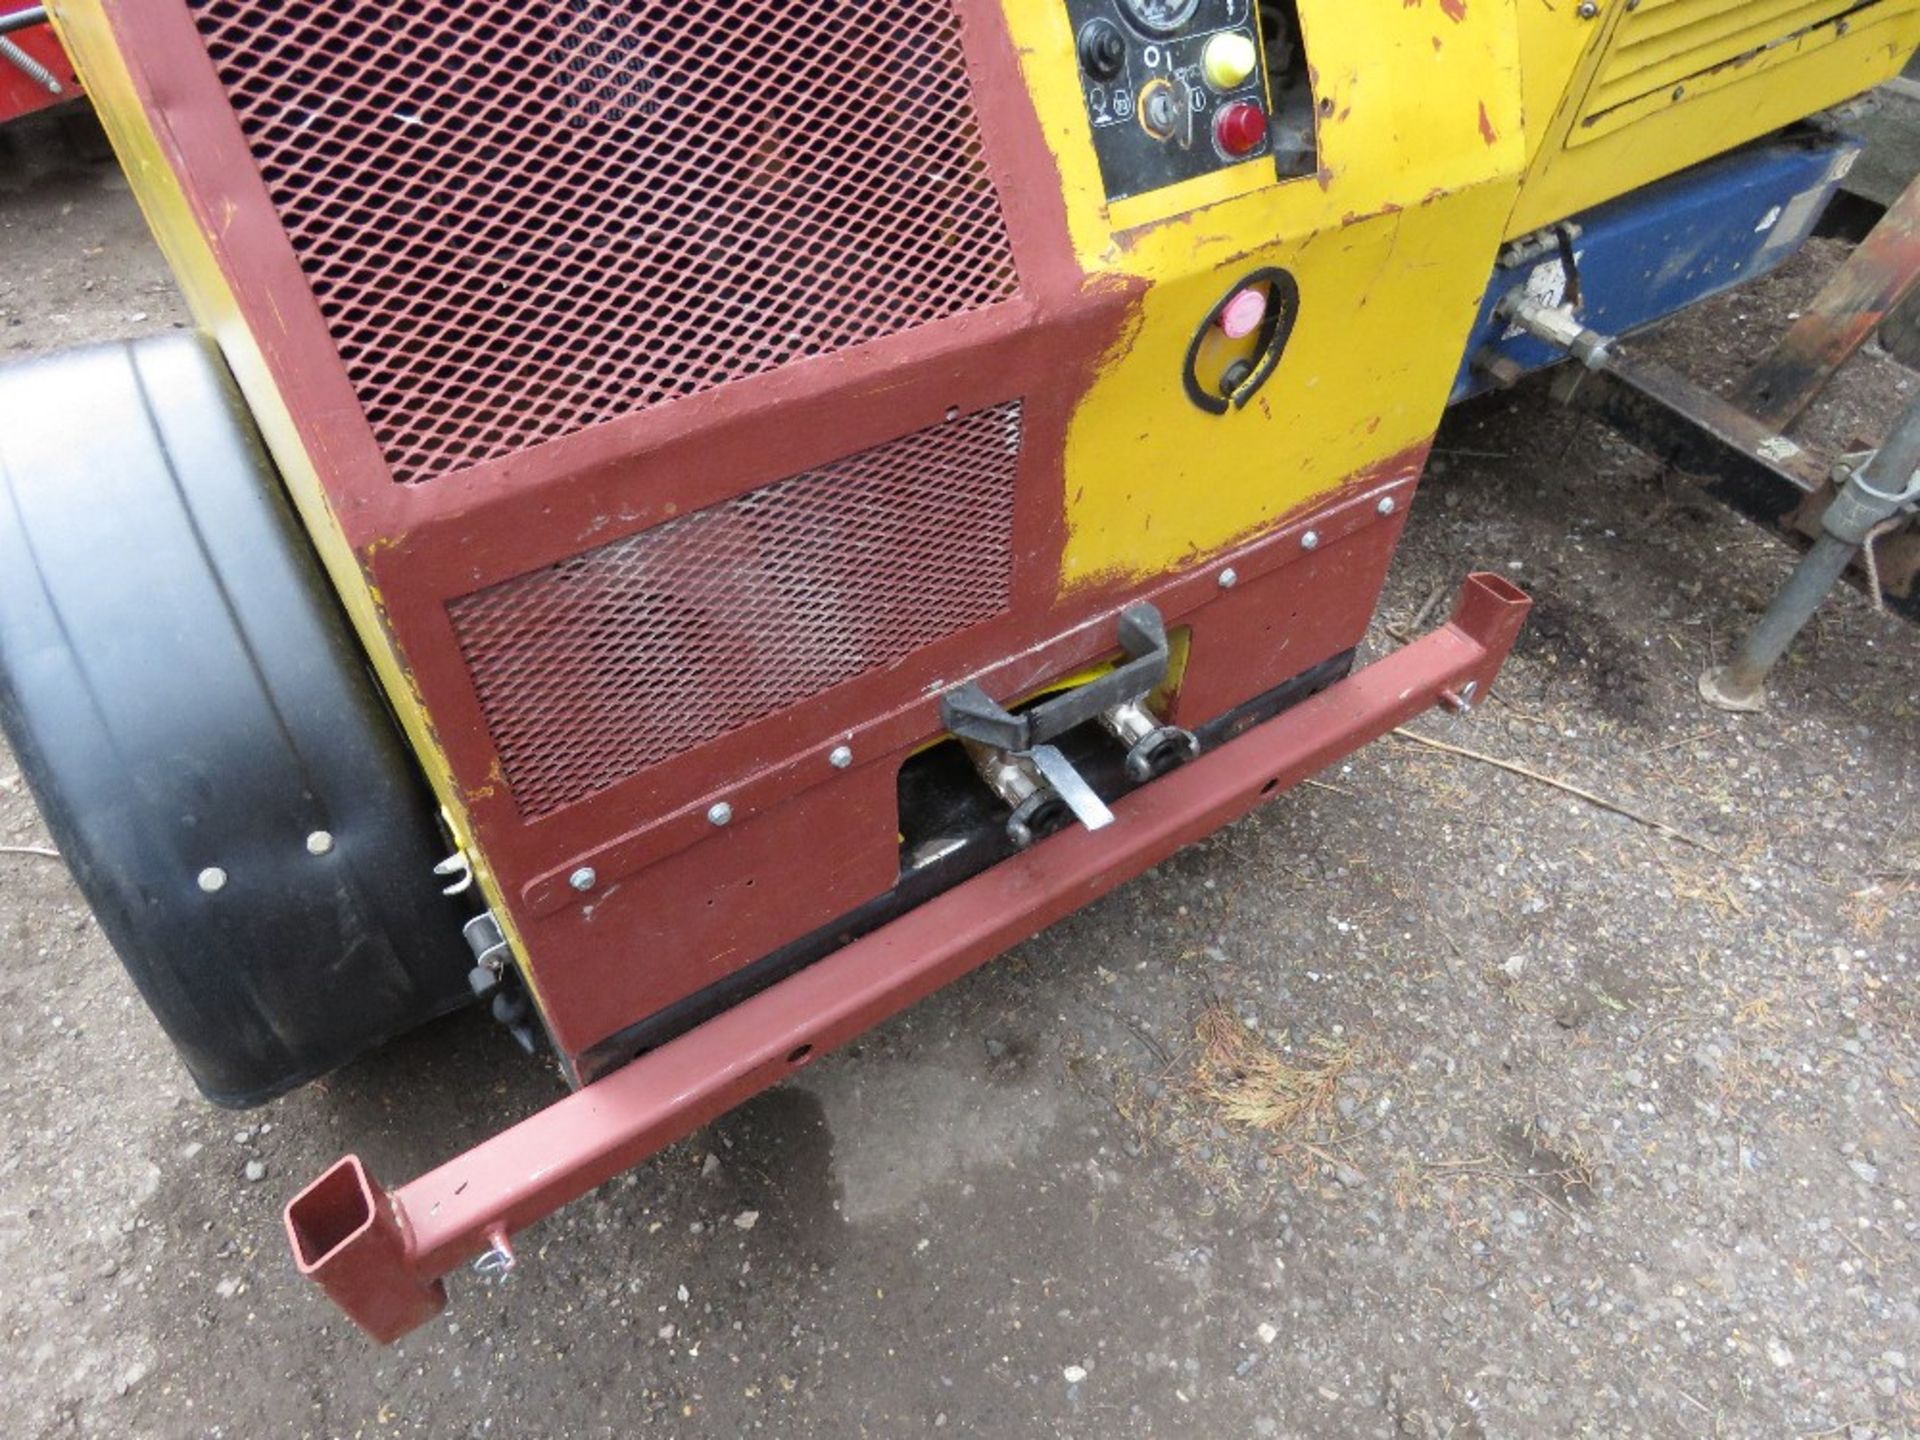 ATLAS COPCO YANMAR ENGINED COMPRESSOR, WHEN TESTED WAS SEEN TO RUN AND MAKE AIR (BATTERY LOW) - Image 3 of 6